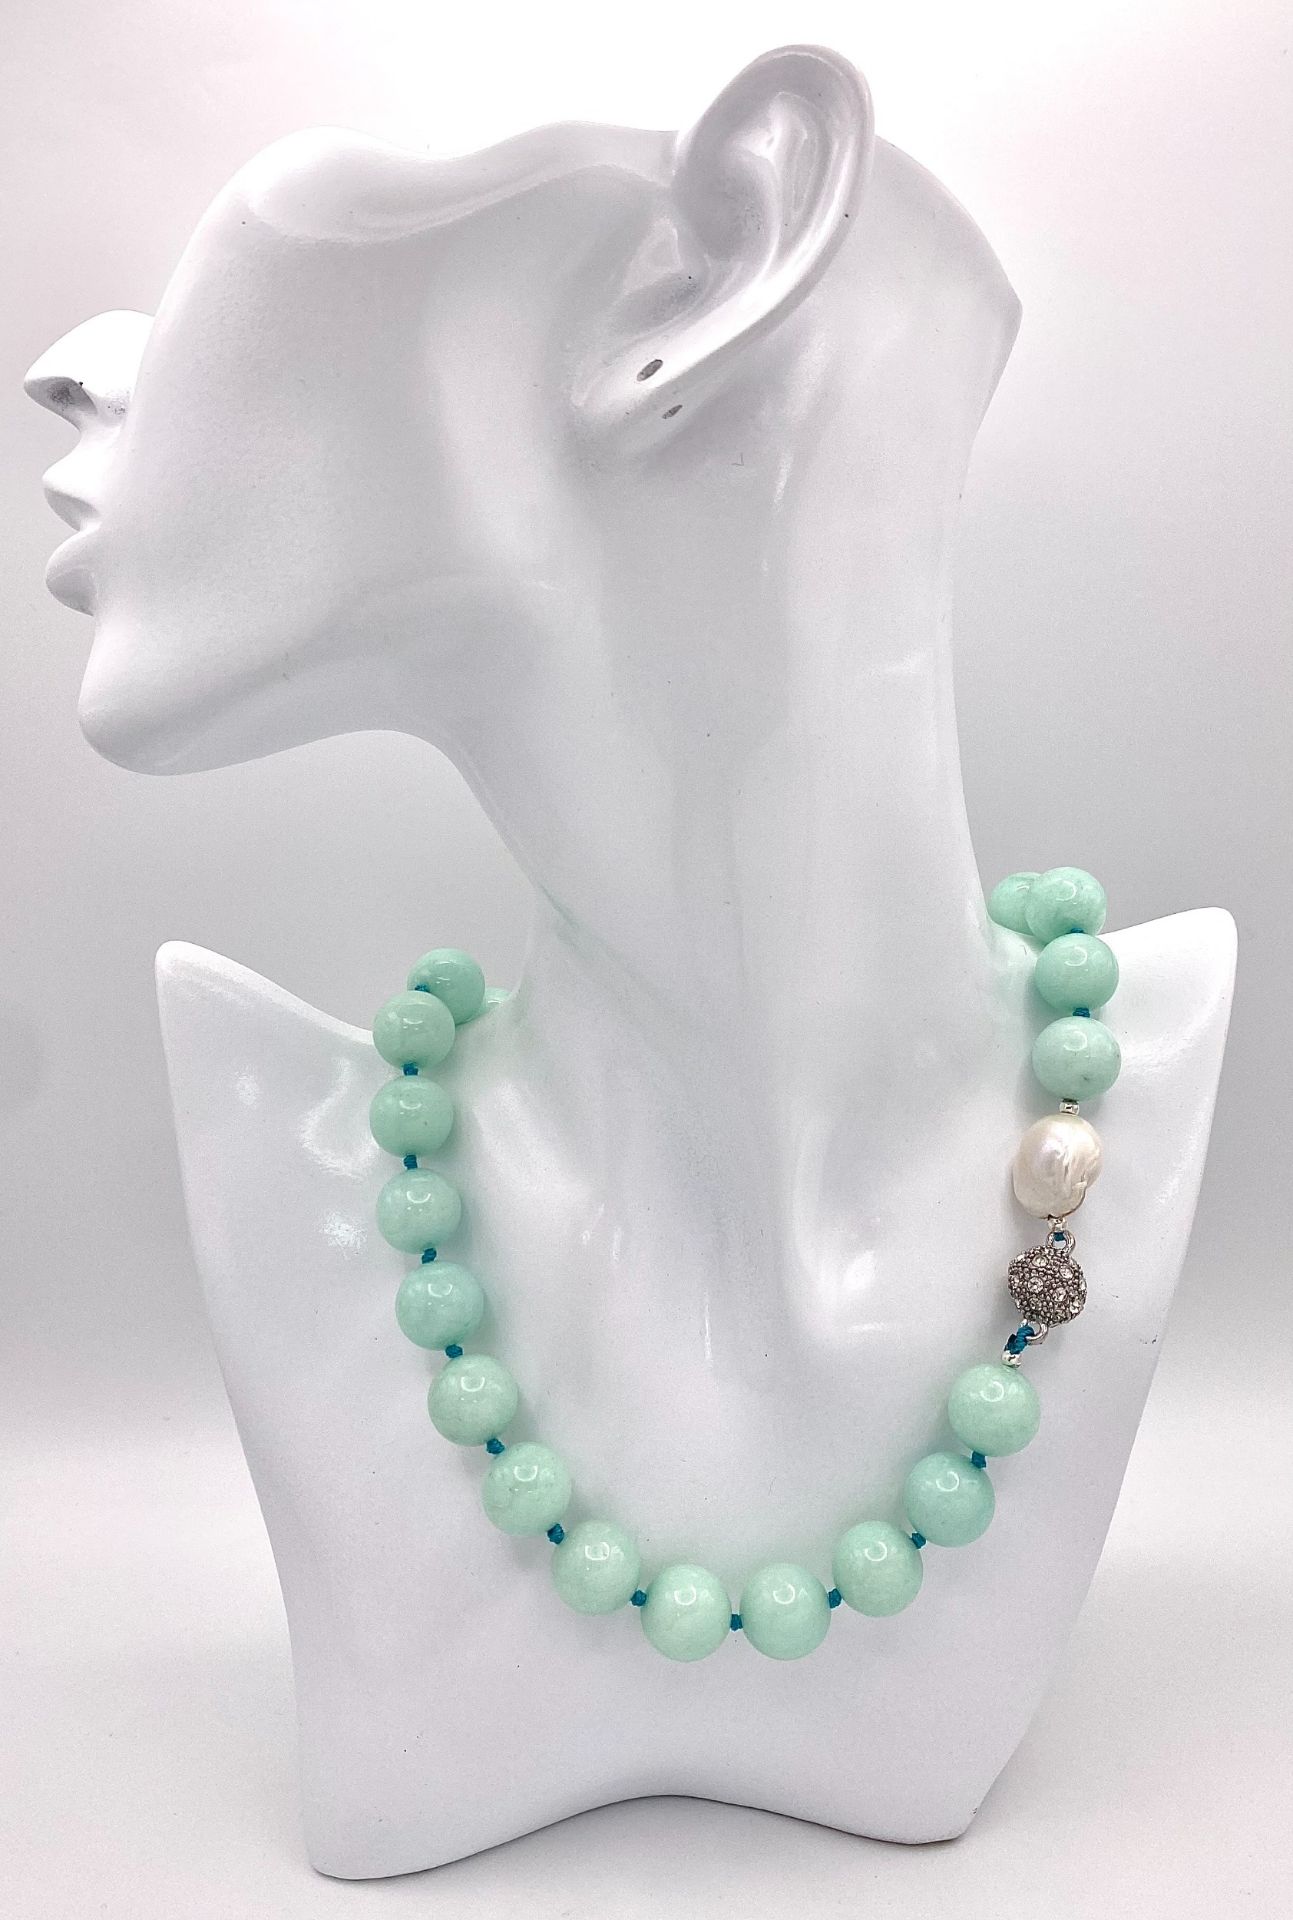 A Large Beaded Amazonite Necklace with a Keisha Baroque Pearl Interrupter. 14mm beads. Necklace